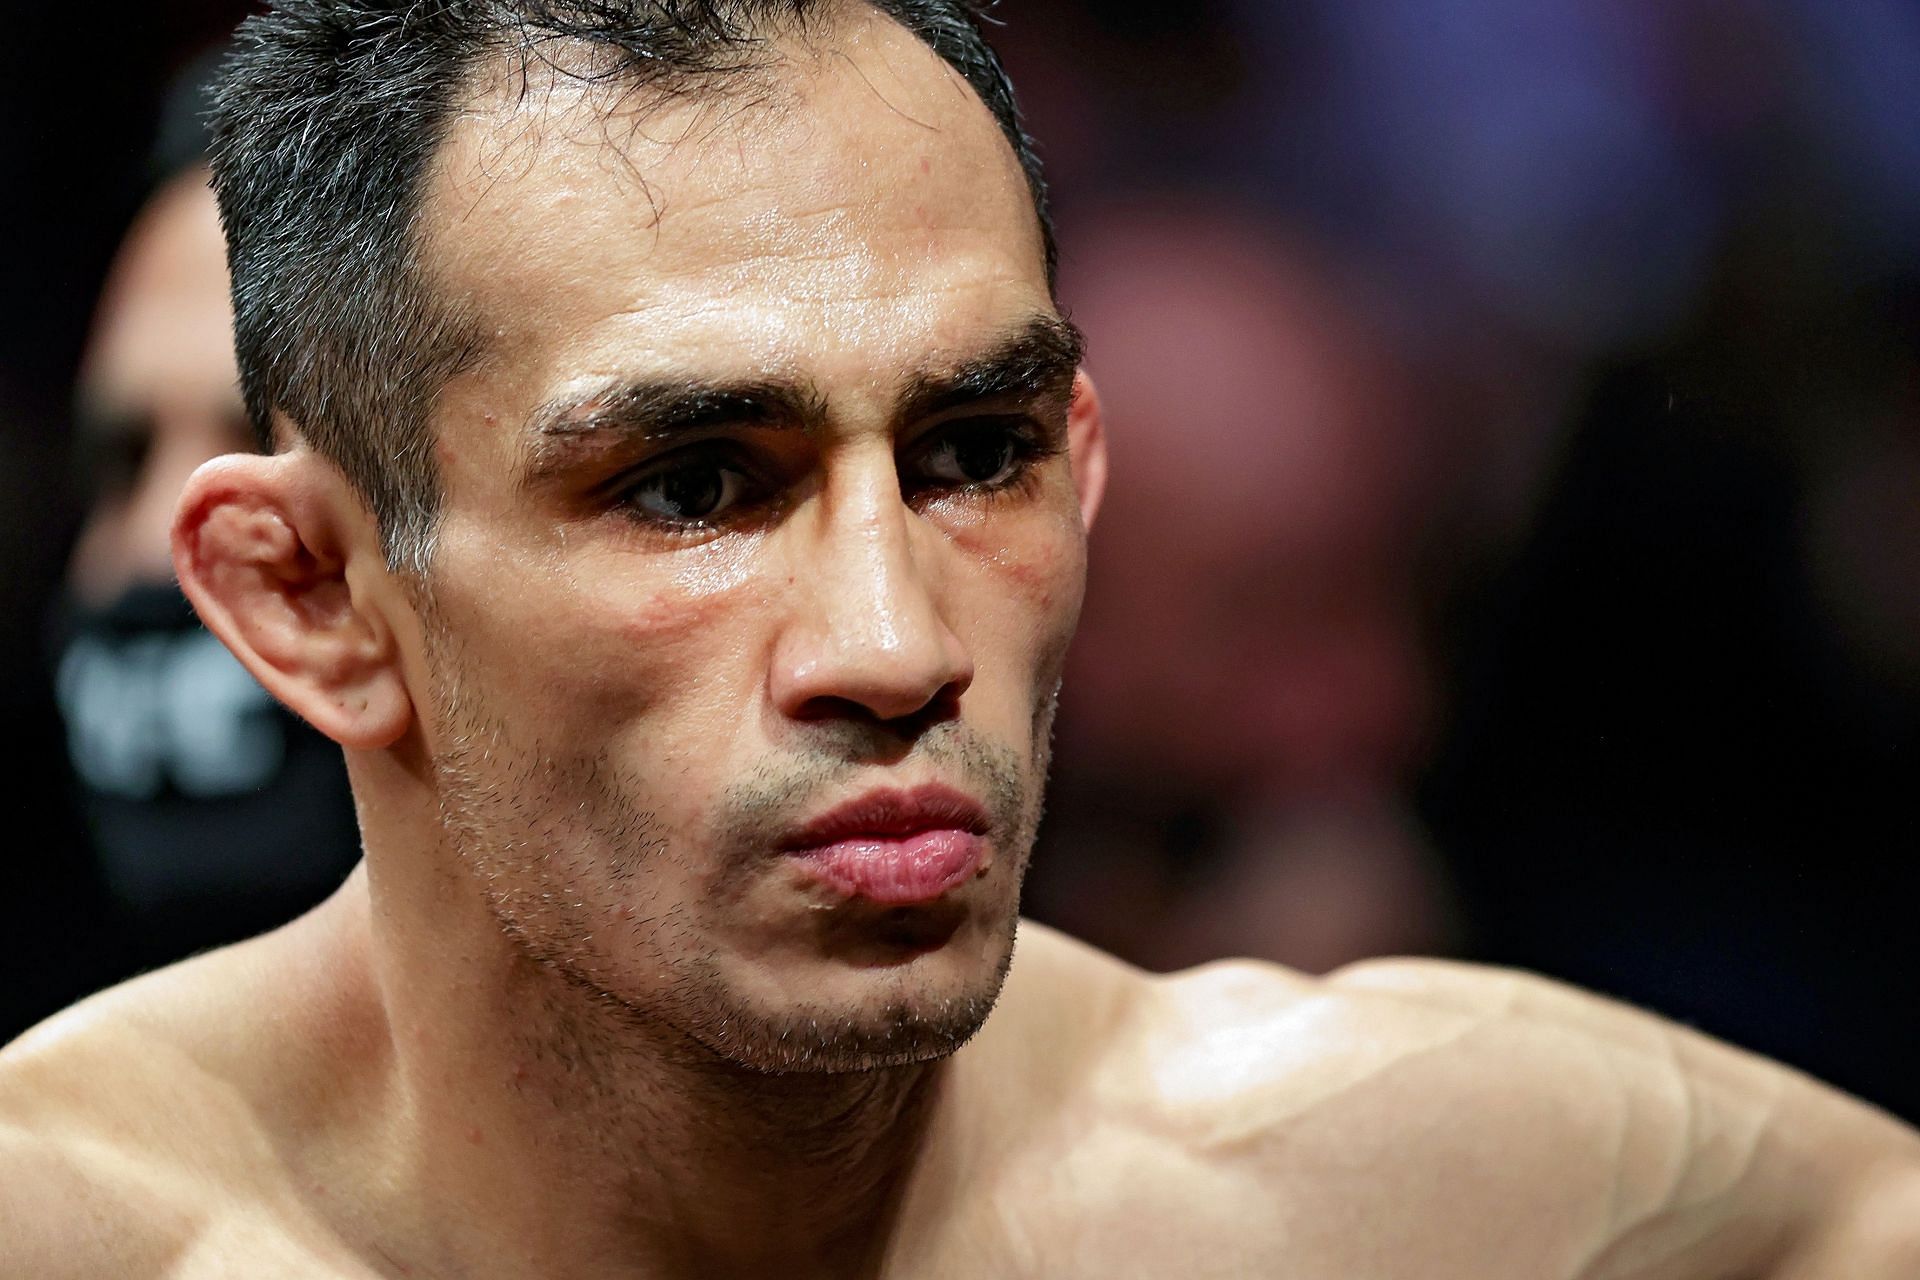 Tony Ferguson fought once this year in a losing effort to Beneil Dariush